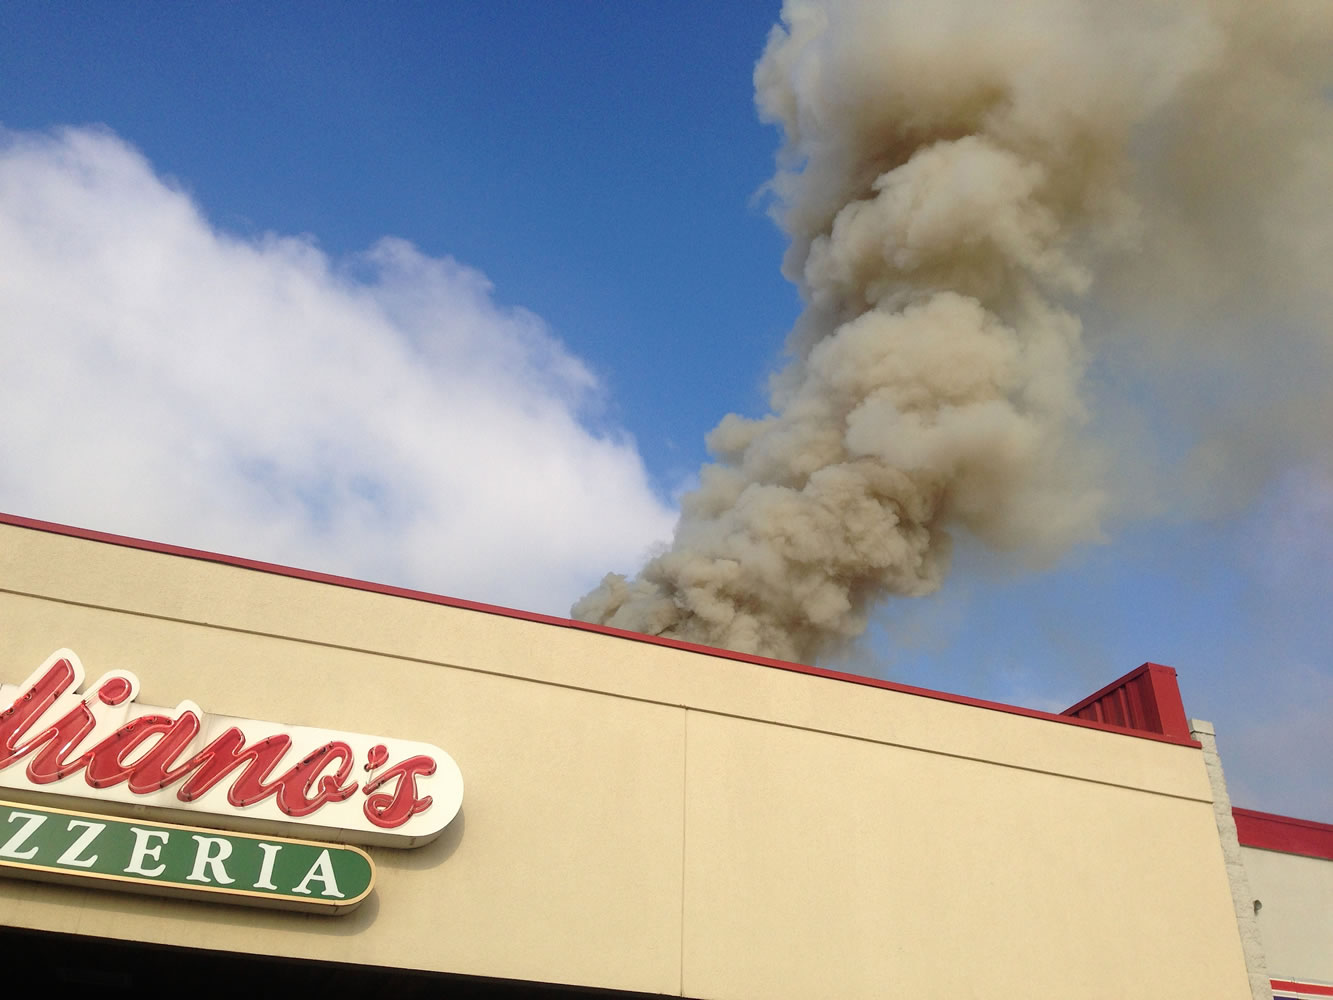 Smoke billows from a pizza oven chimney at Juliano's Pizzeria on Southeast Mill Plain Boulevard early Saturday afternoon.